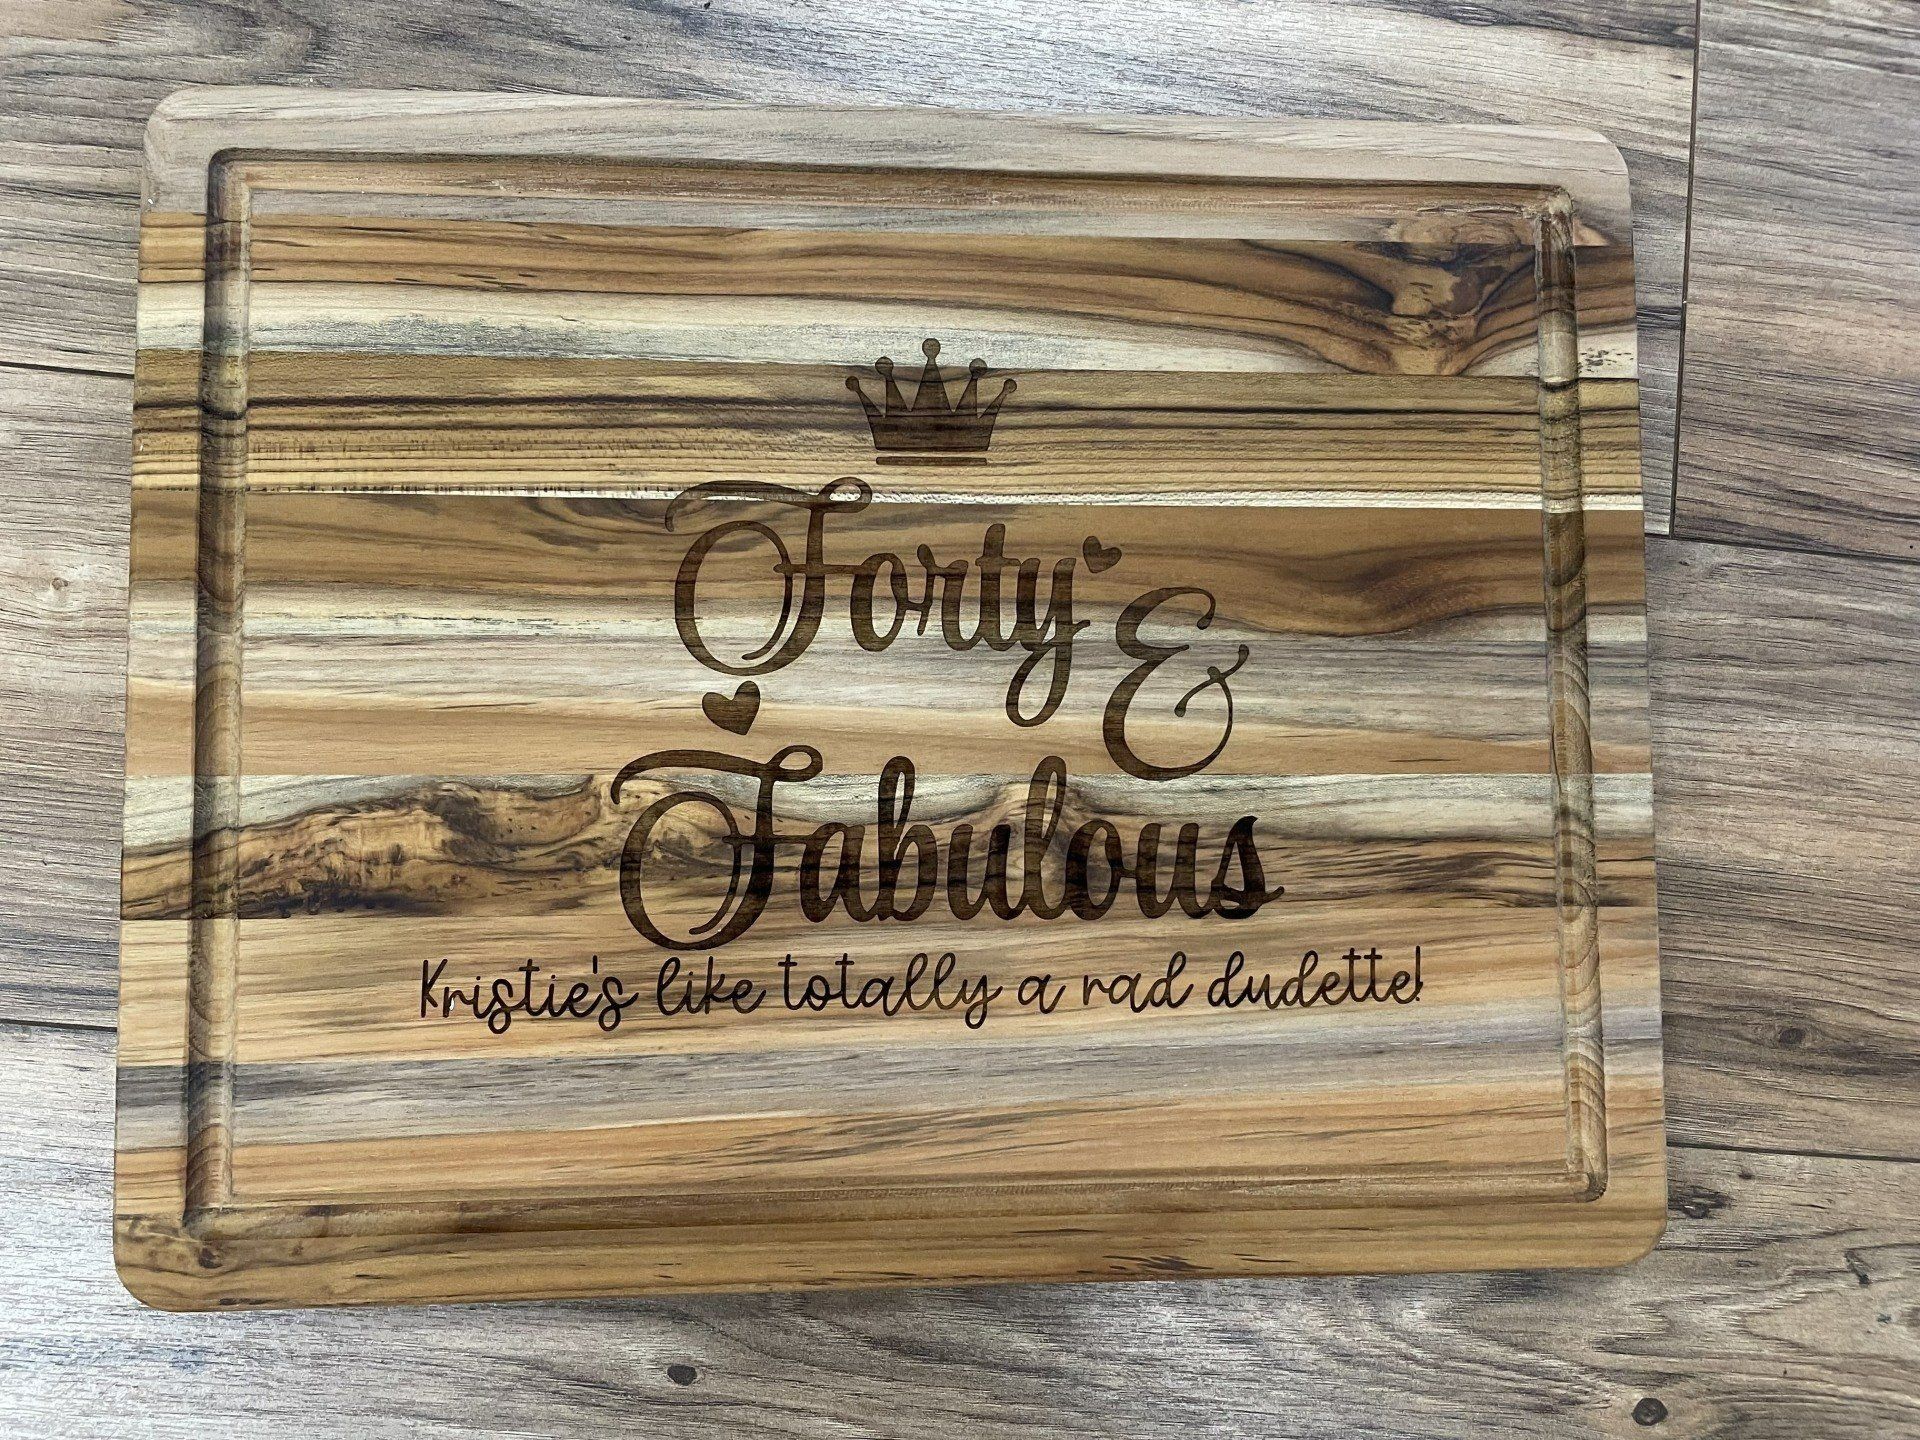 Laser engraving on wood - Naples, FL - Smiley Graphics & Promotions